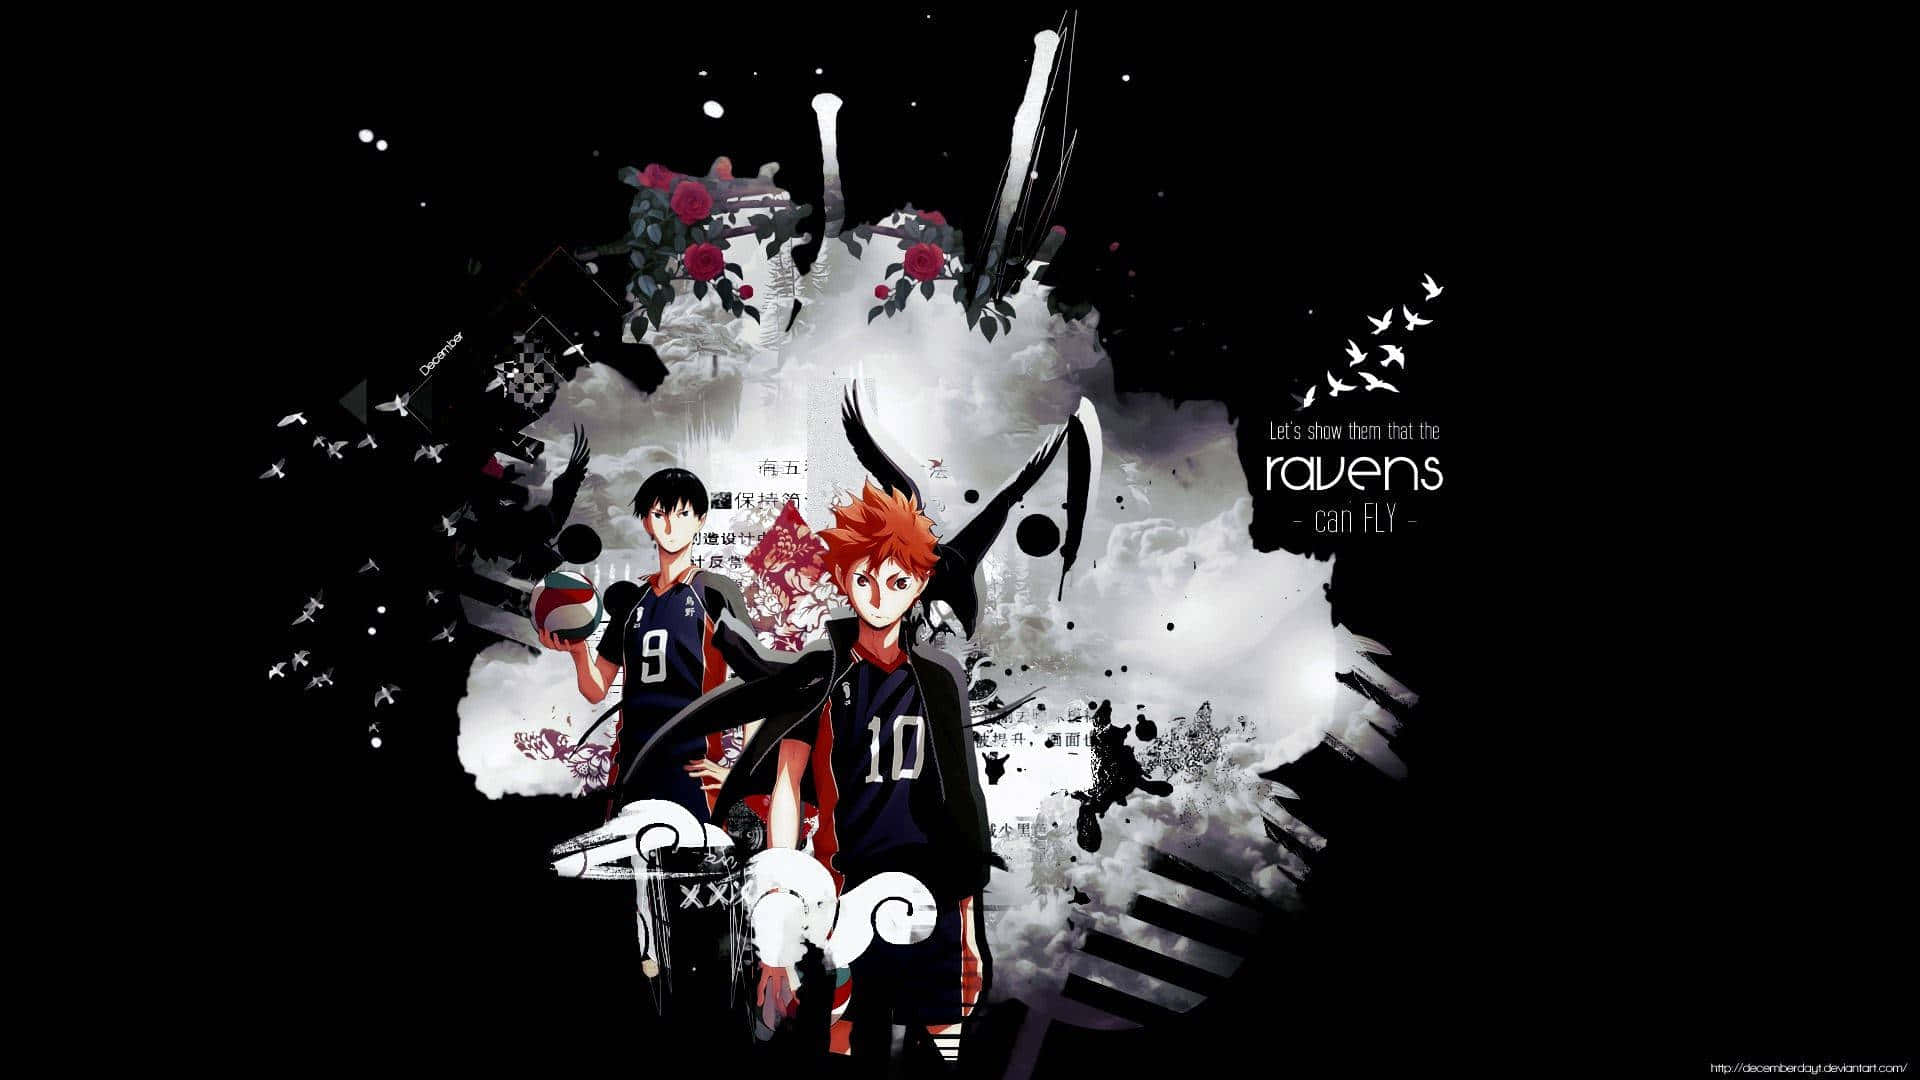 The Power of Teamwork // Description: A stunning desktop background of the beloved animation "Haikyuu" depicting our heroes working together as a team to reach their goals. // Related Keywords: Anime, Haikyuu, Teamwork, Aesthetic, Desktop Background, Wallpaper, Character, Shōyō Hinata, Tobio Kageyama. Wallpaper